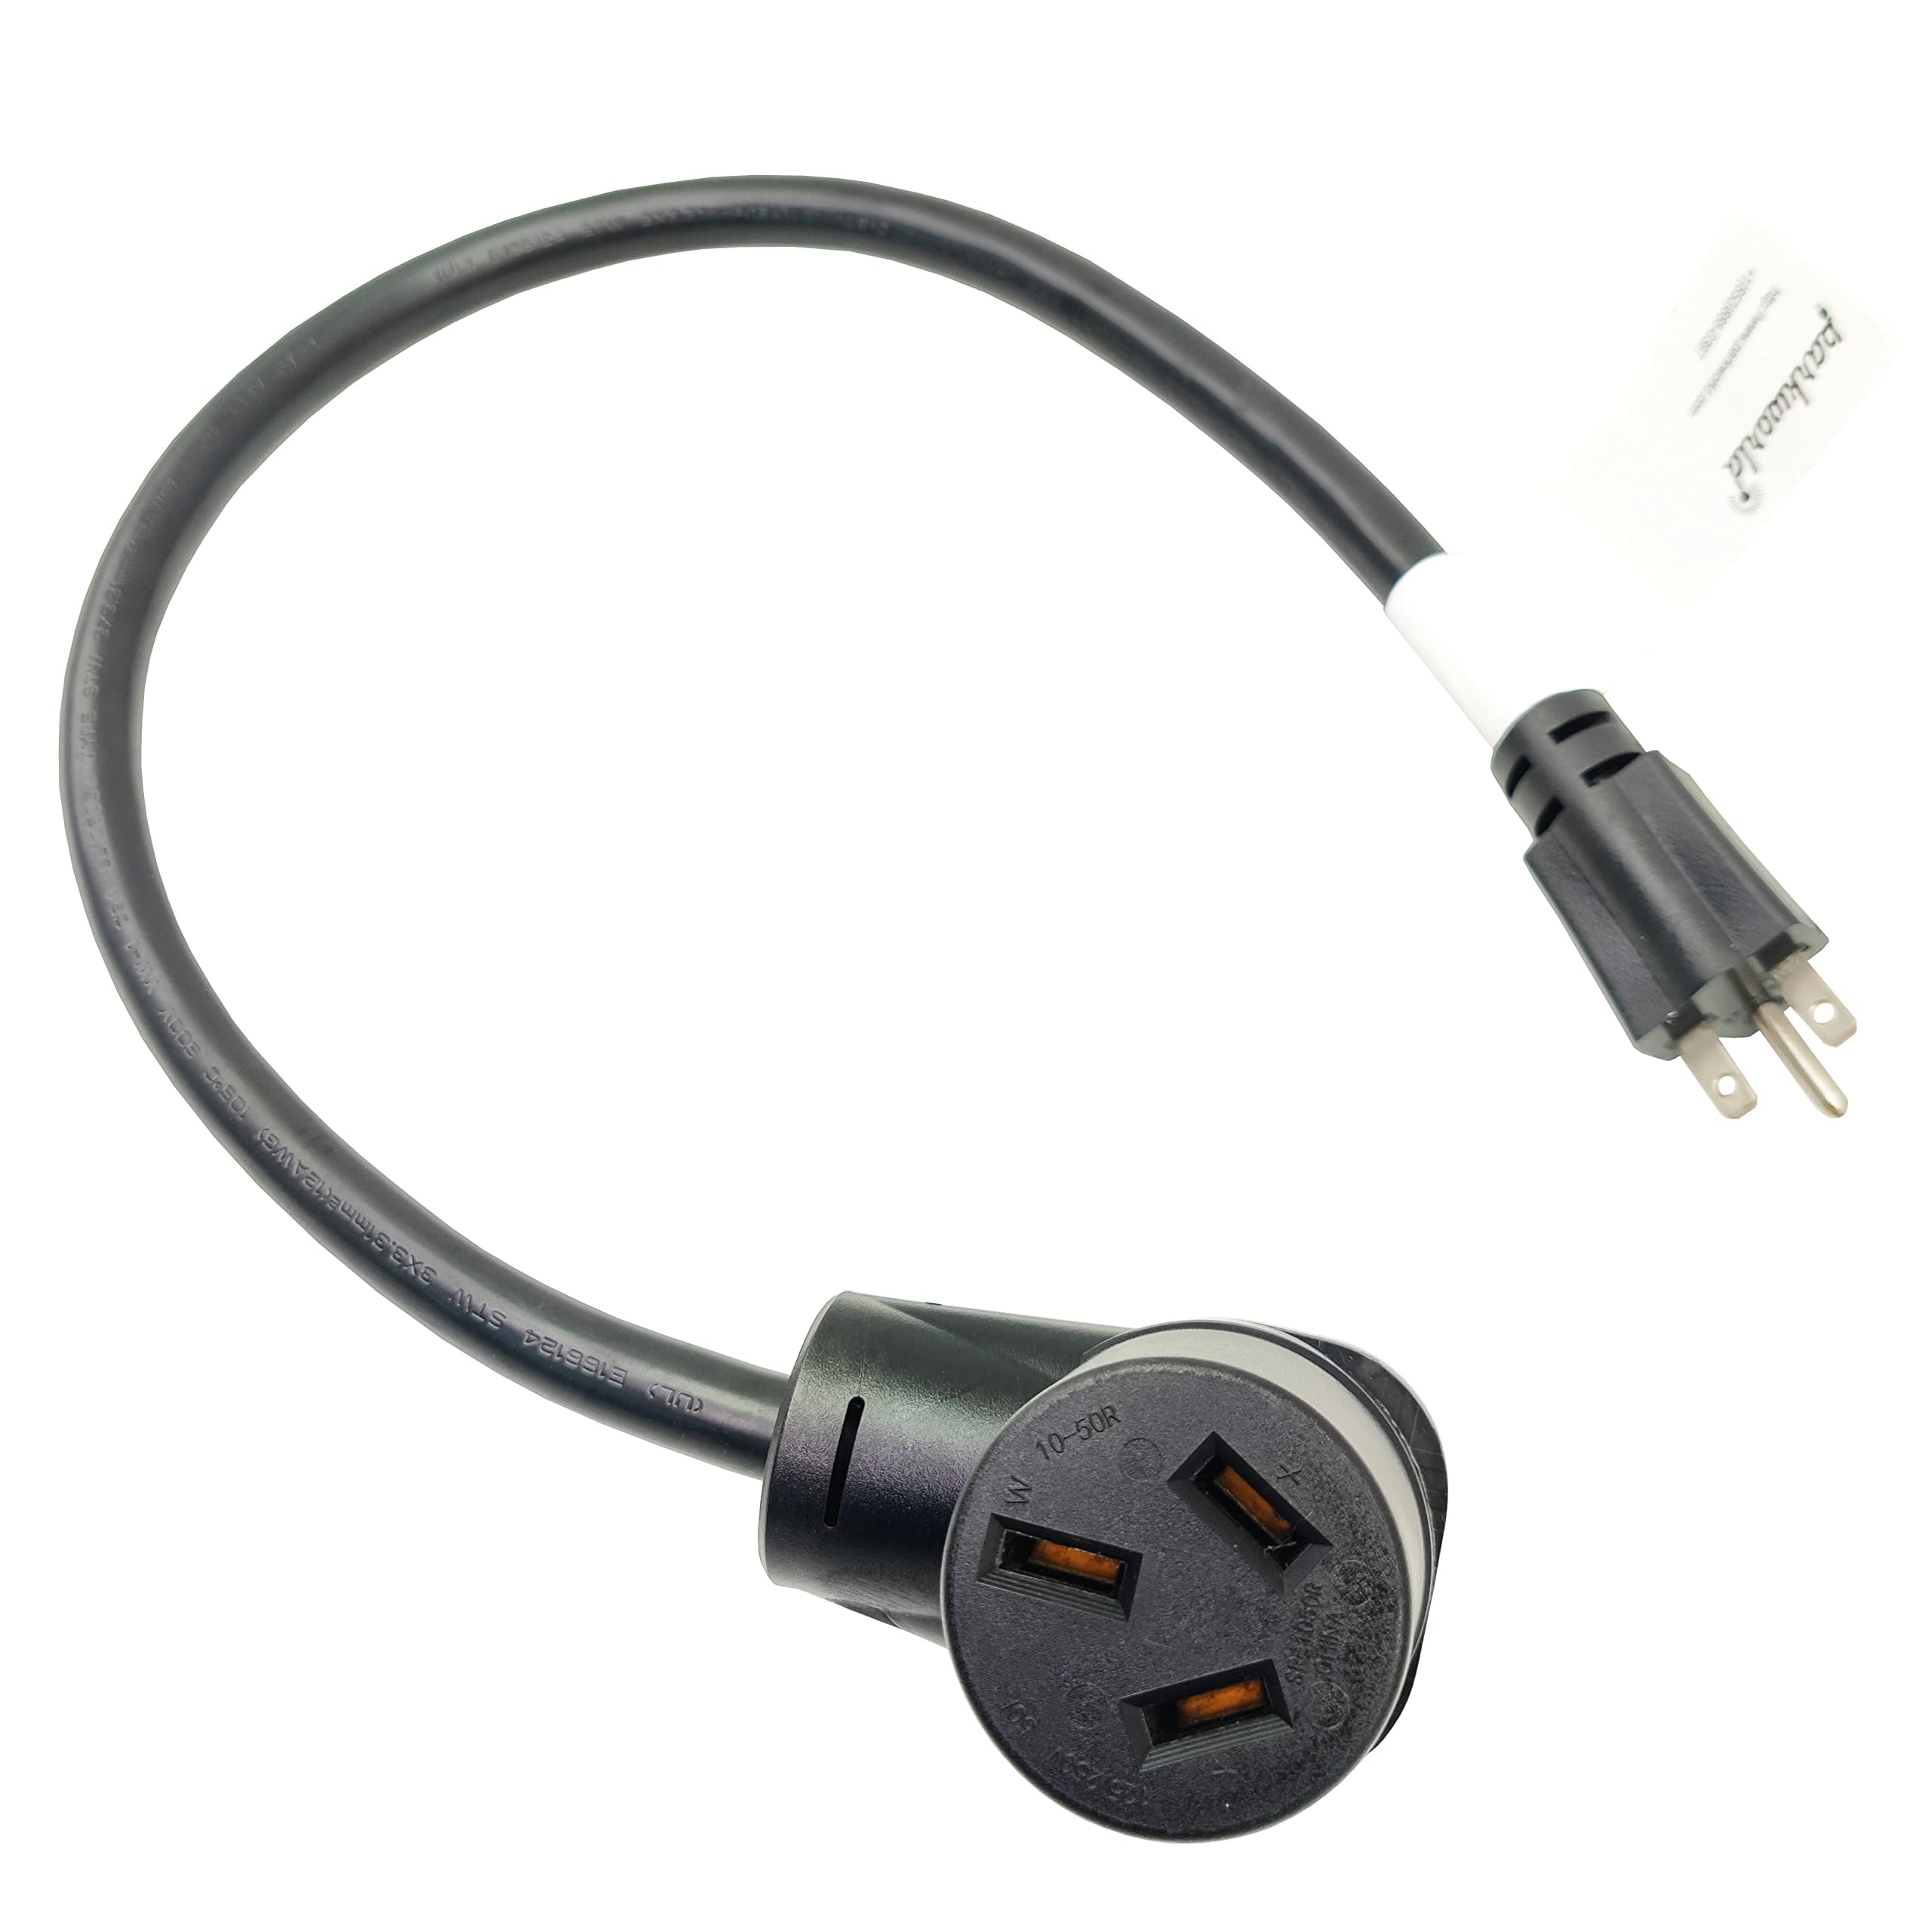 Parkworld 61643A Adapter Cord A/C 3 Prong Plug 6-15P to 10-50R Electric  Stove Receptacle, NEMA 6-15 Dryer Male to NEMA 10-50R Electrical Stove  Female, ONLY Output 15A, 250V 2FT